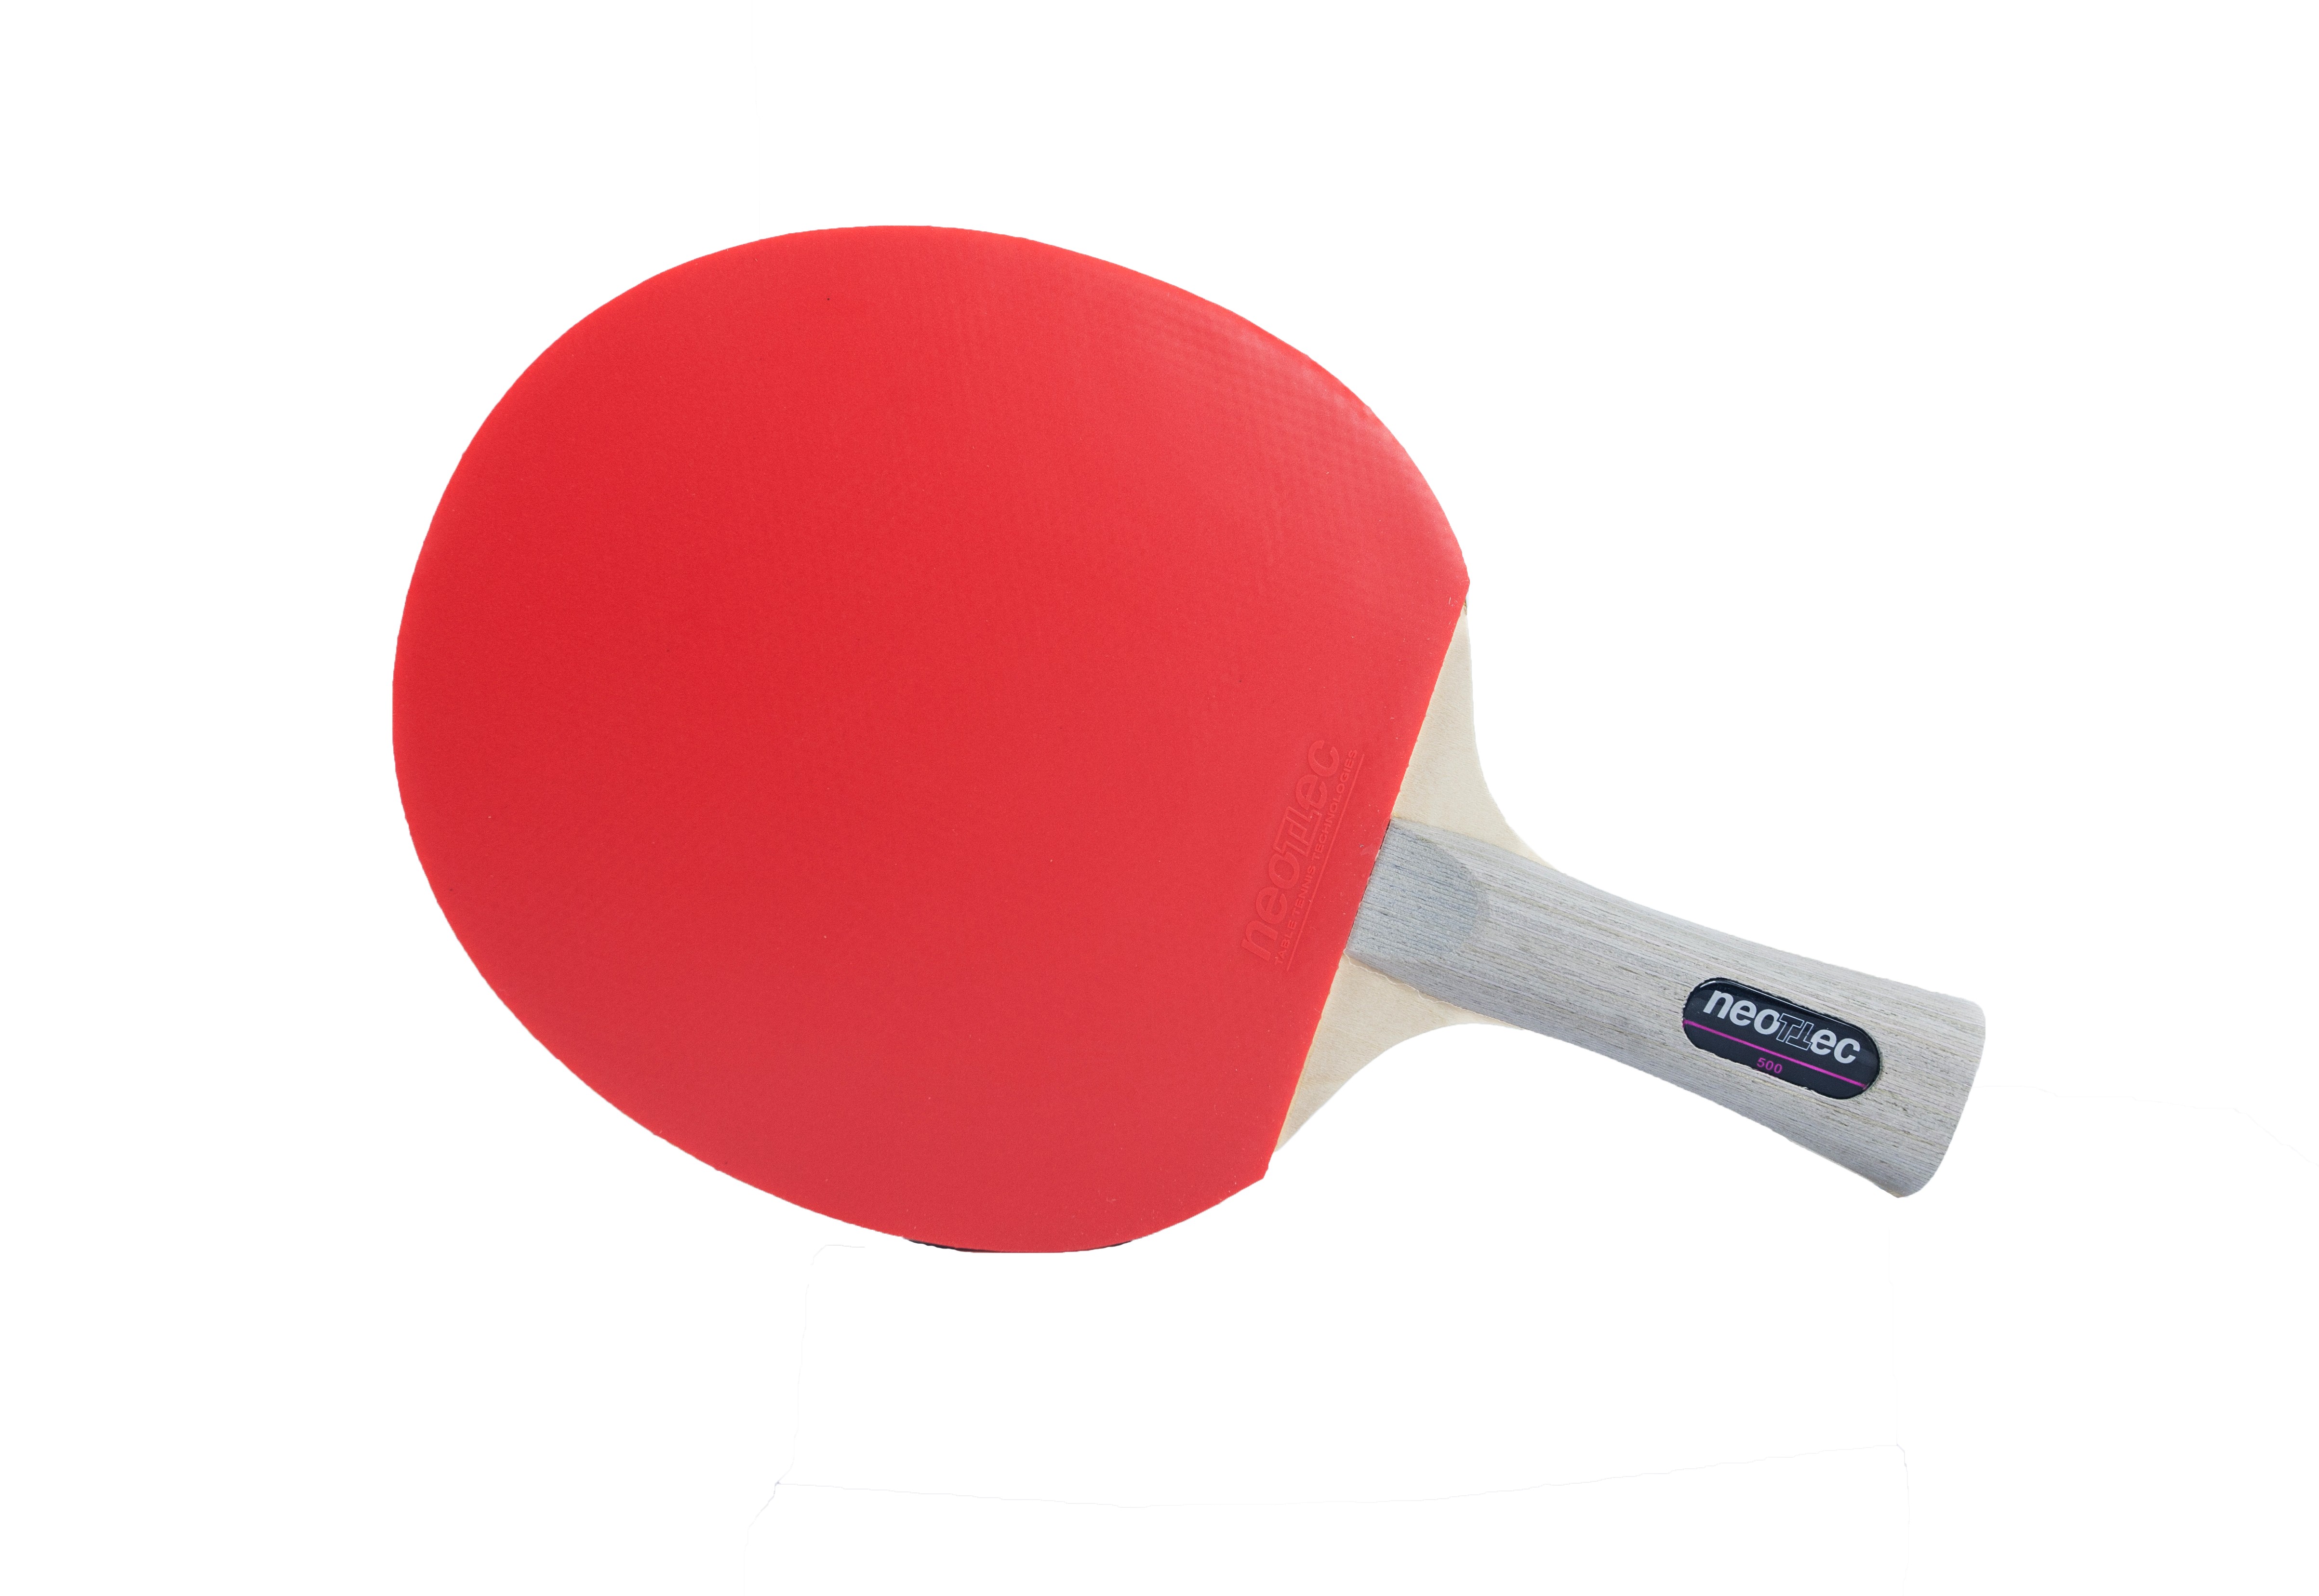 Details about   Neottec 4000C Table Tennis & Ping Pong High Quality Racket Free Ship Authentic 